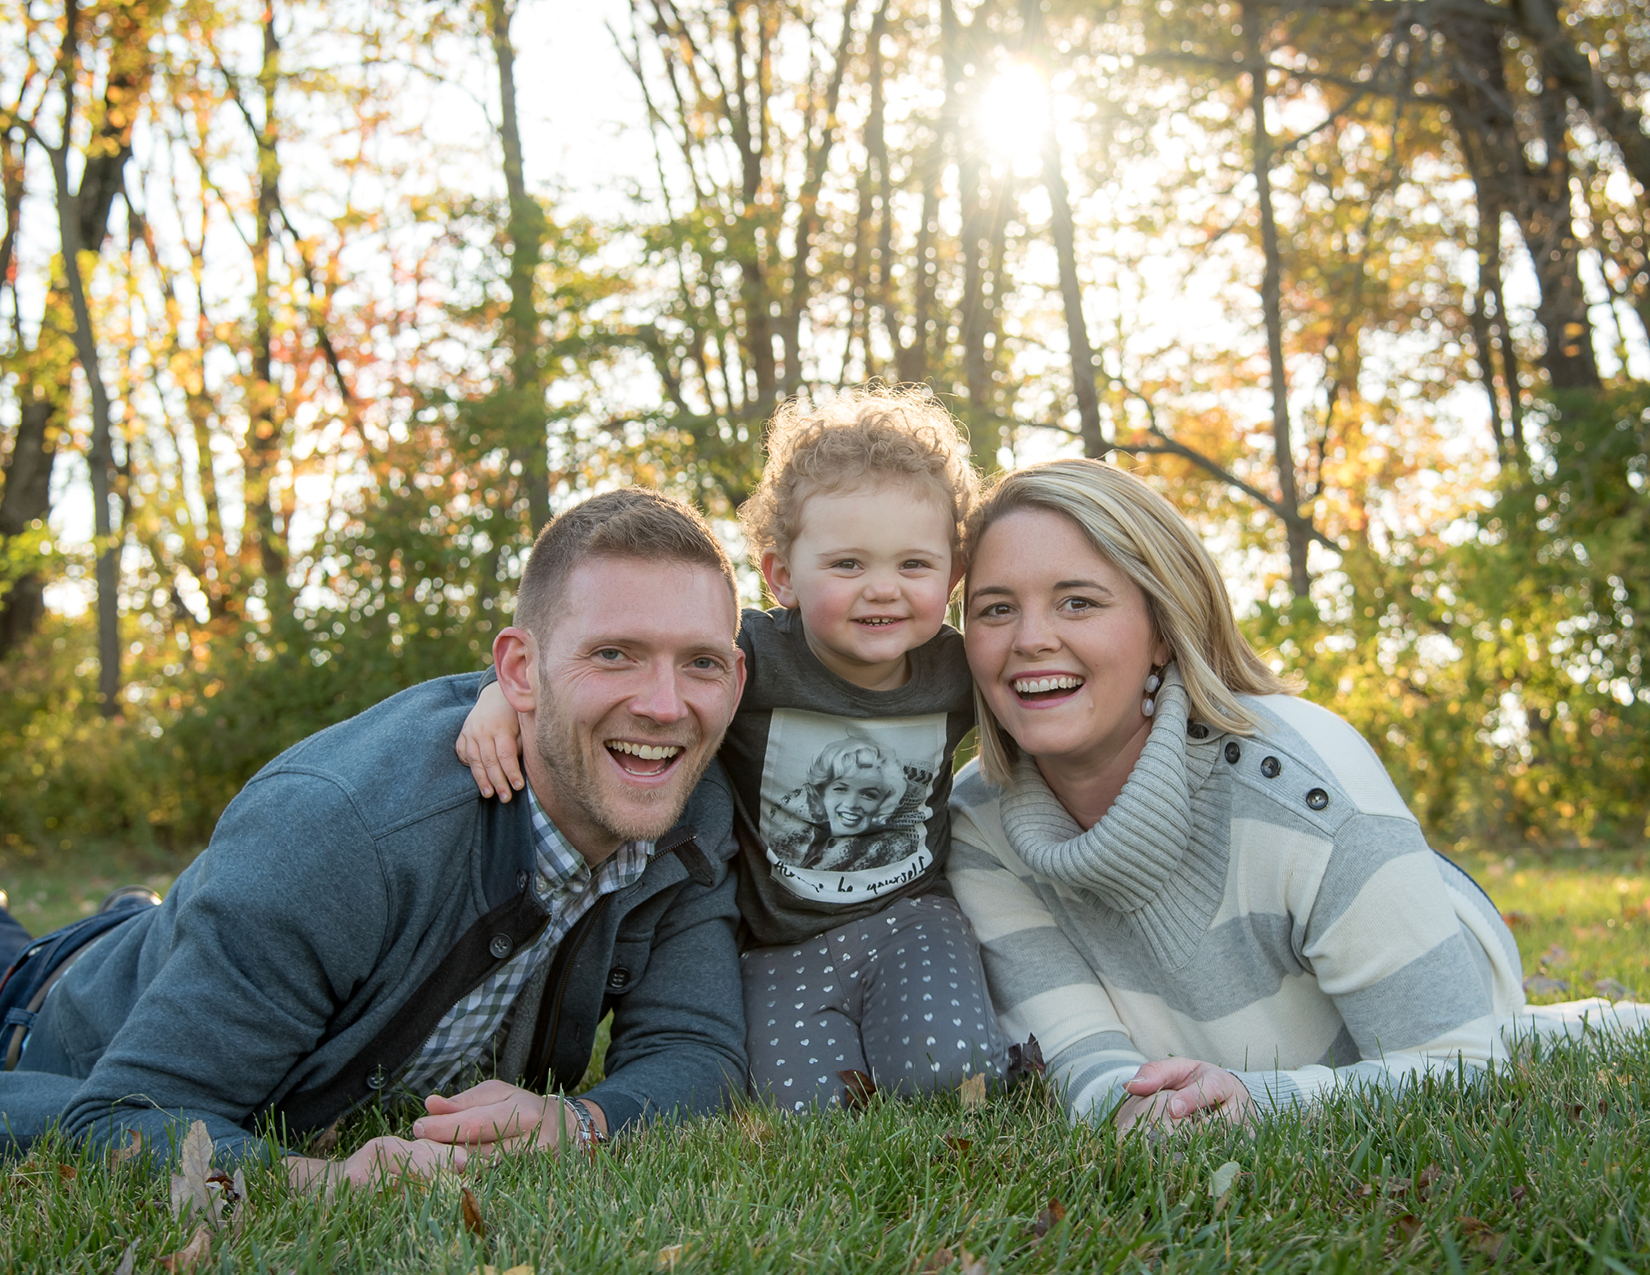 Fall Family Mini Sessions – Michelle Lala Clark Photography